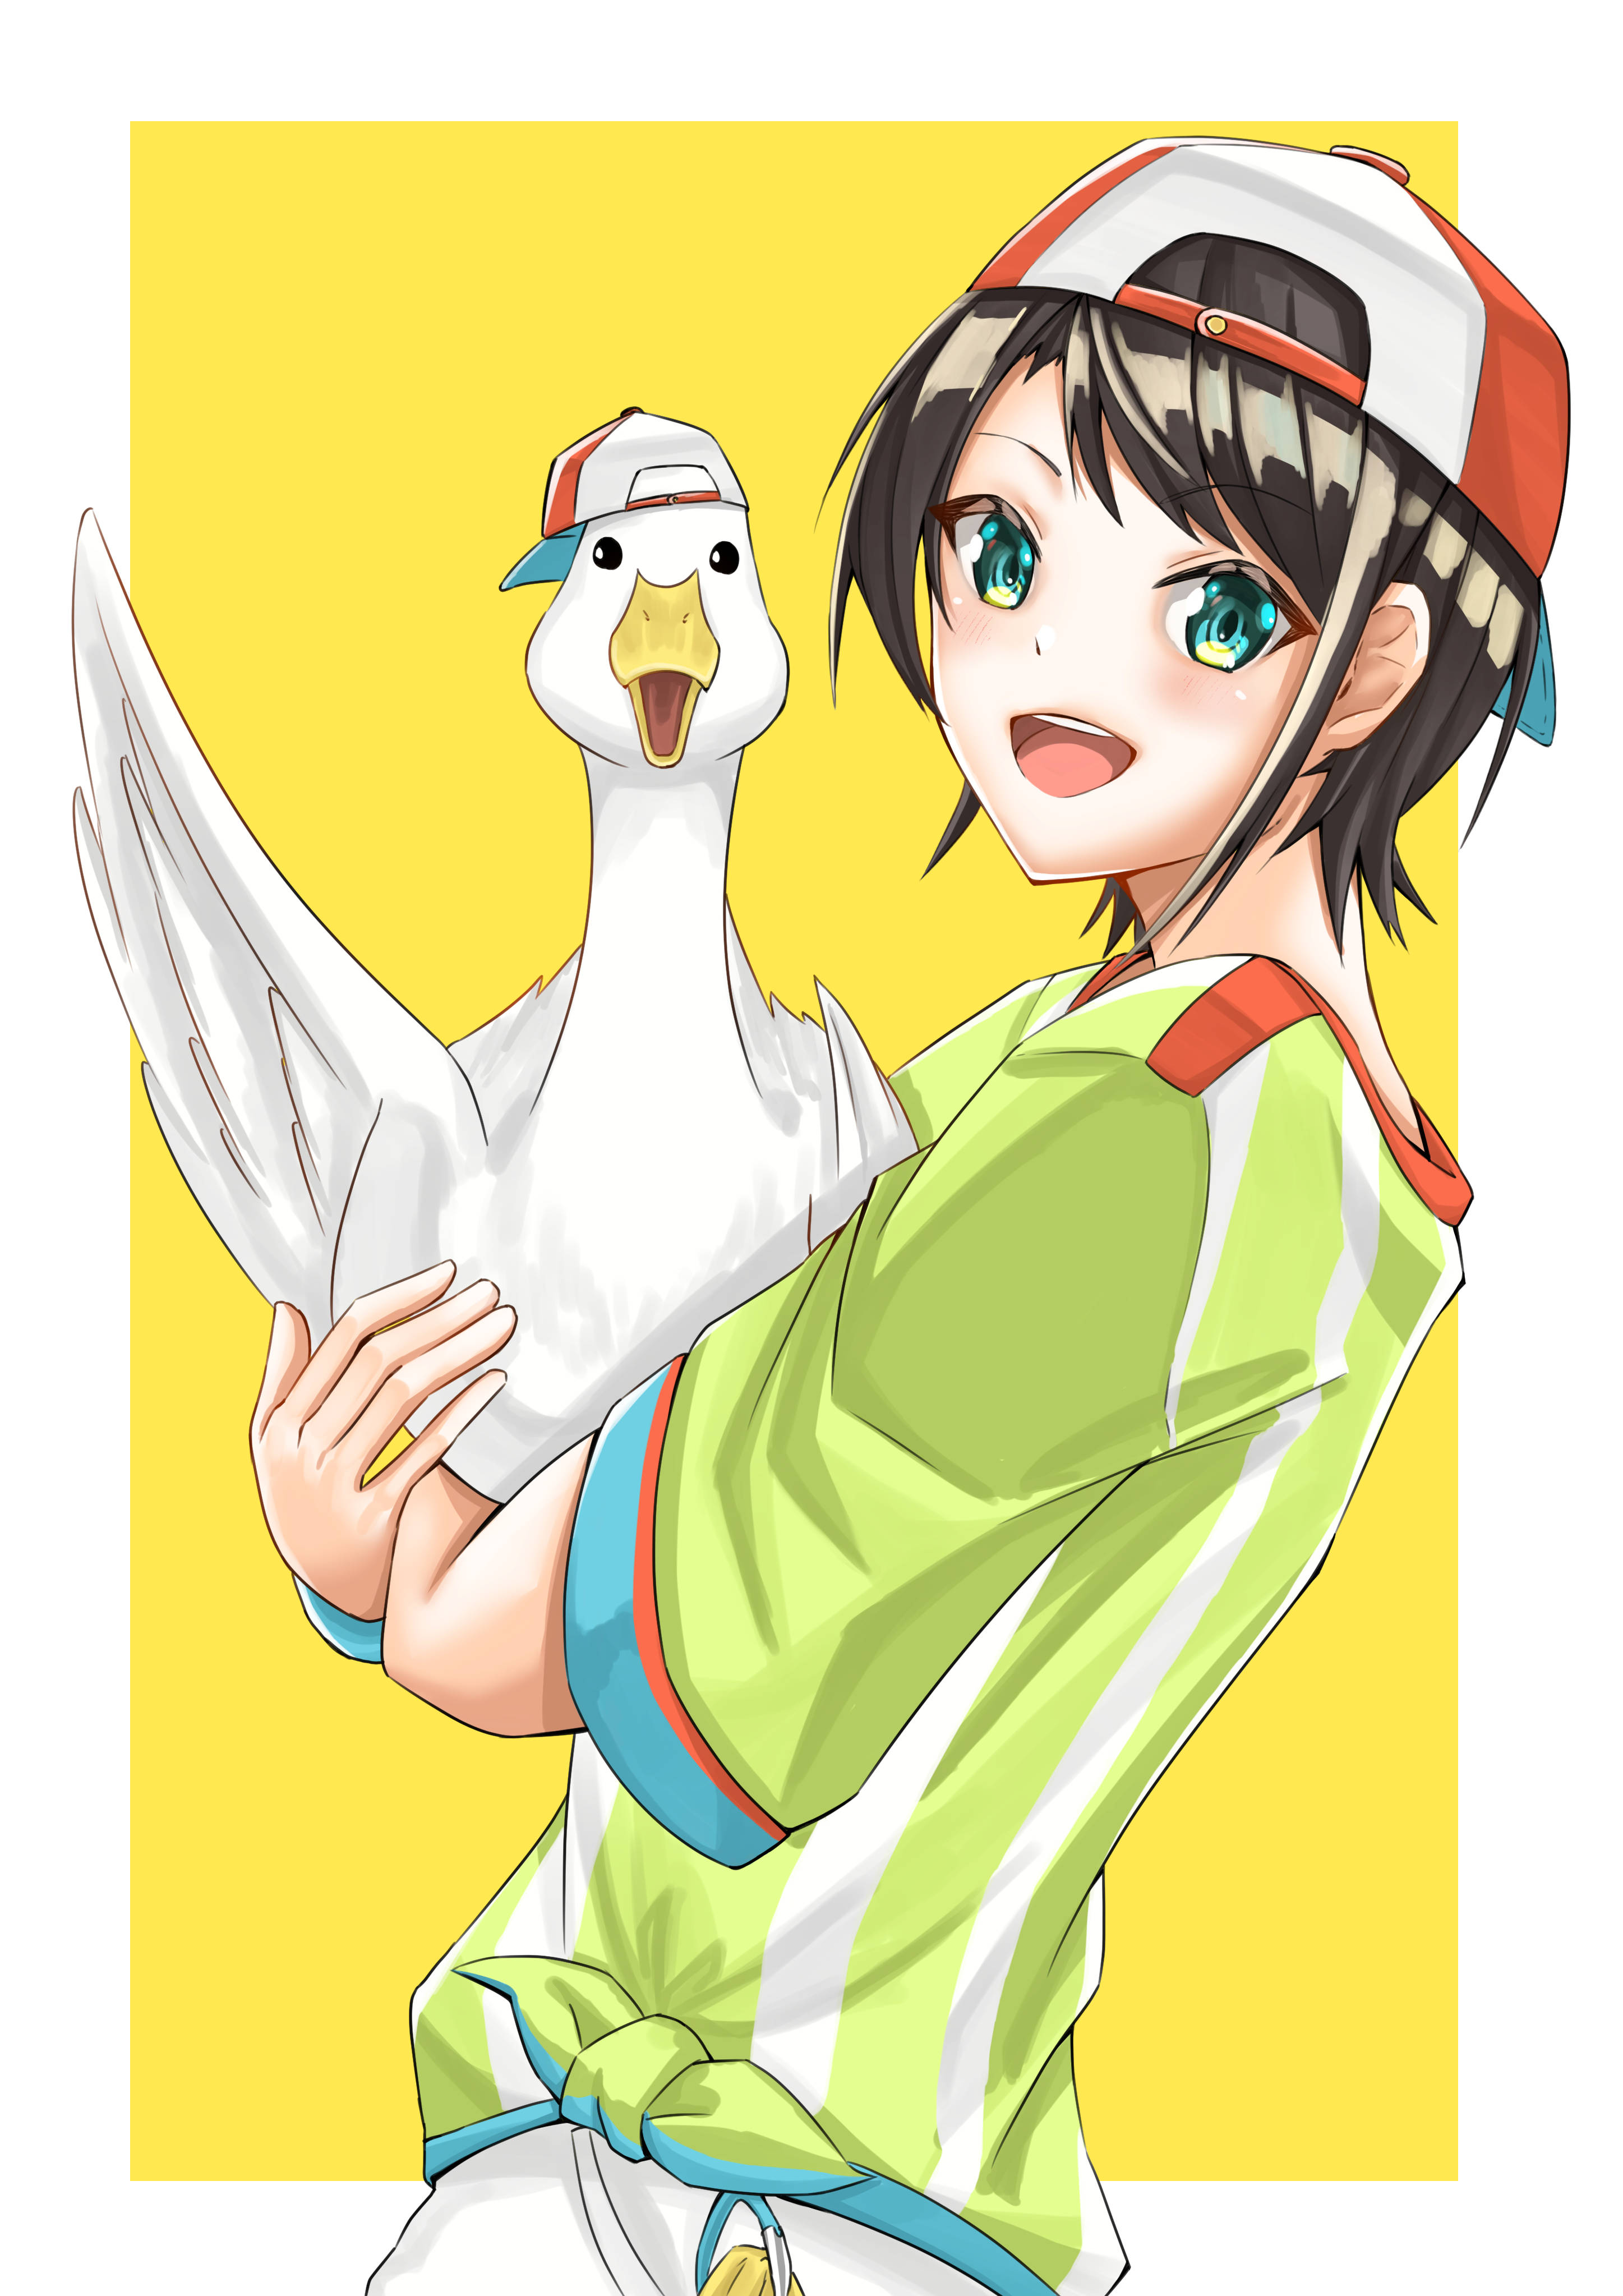 Anime Boy With Duck Pfp Background